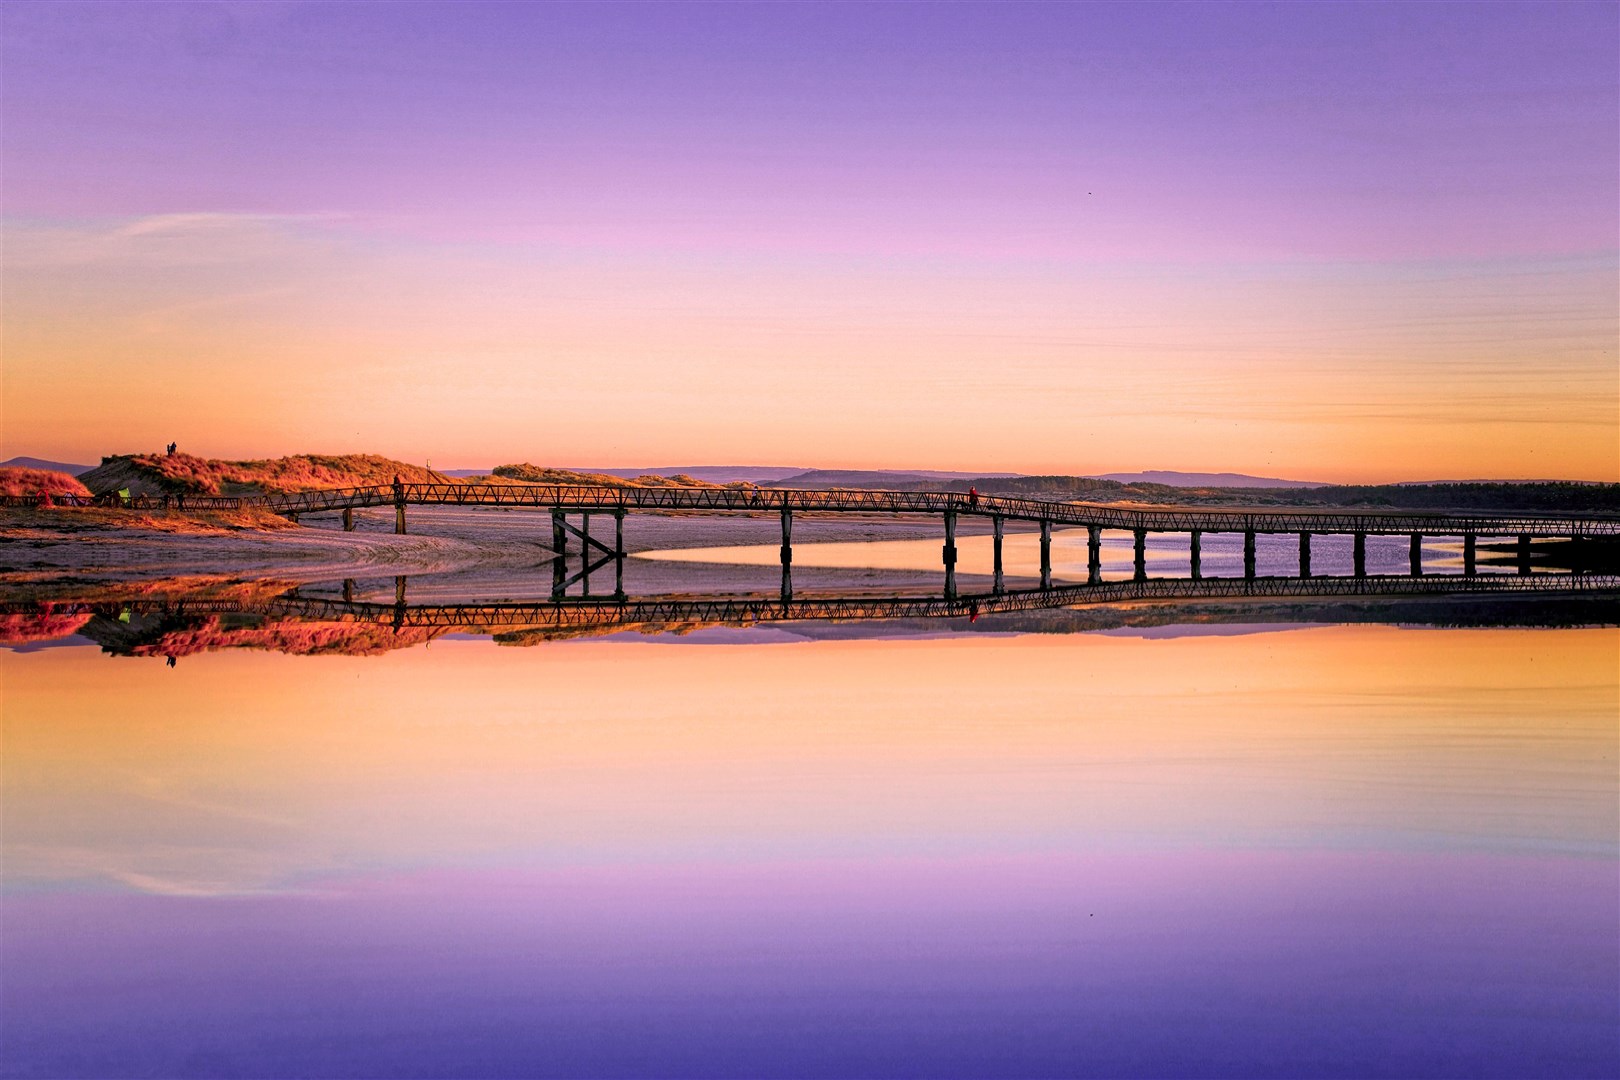 The serene beauty of a Seatown sunrise at Lossiemouth east beach, captured here by Tom McPherson from nearby Hopeman.